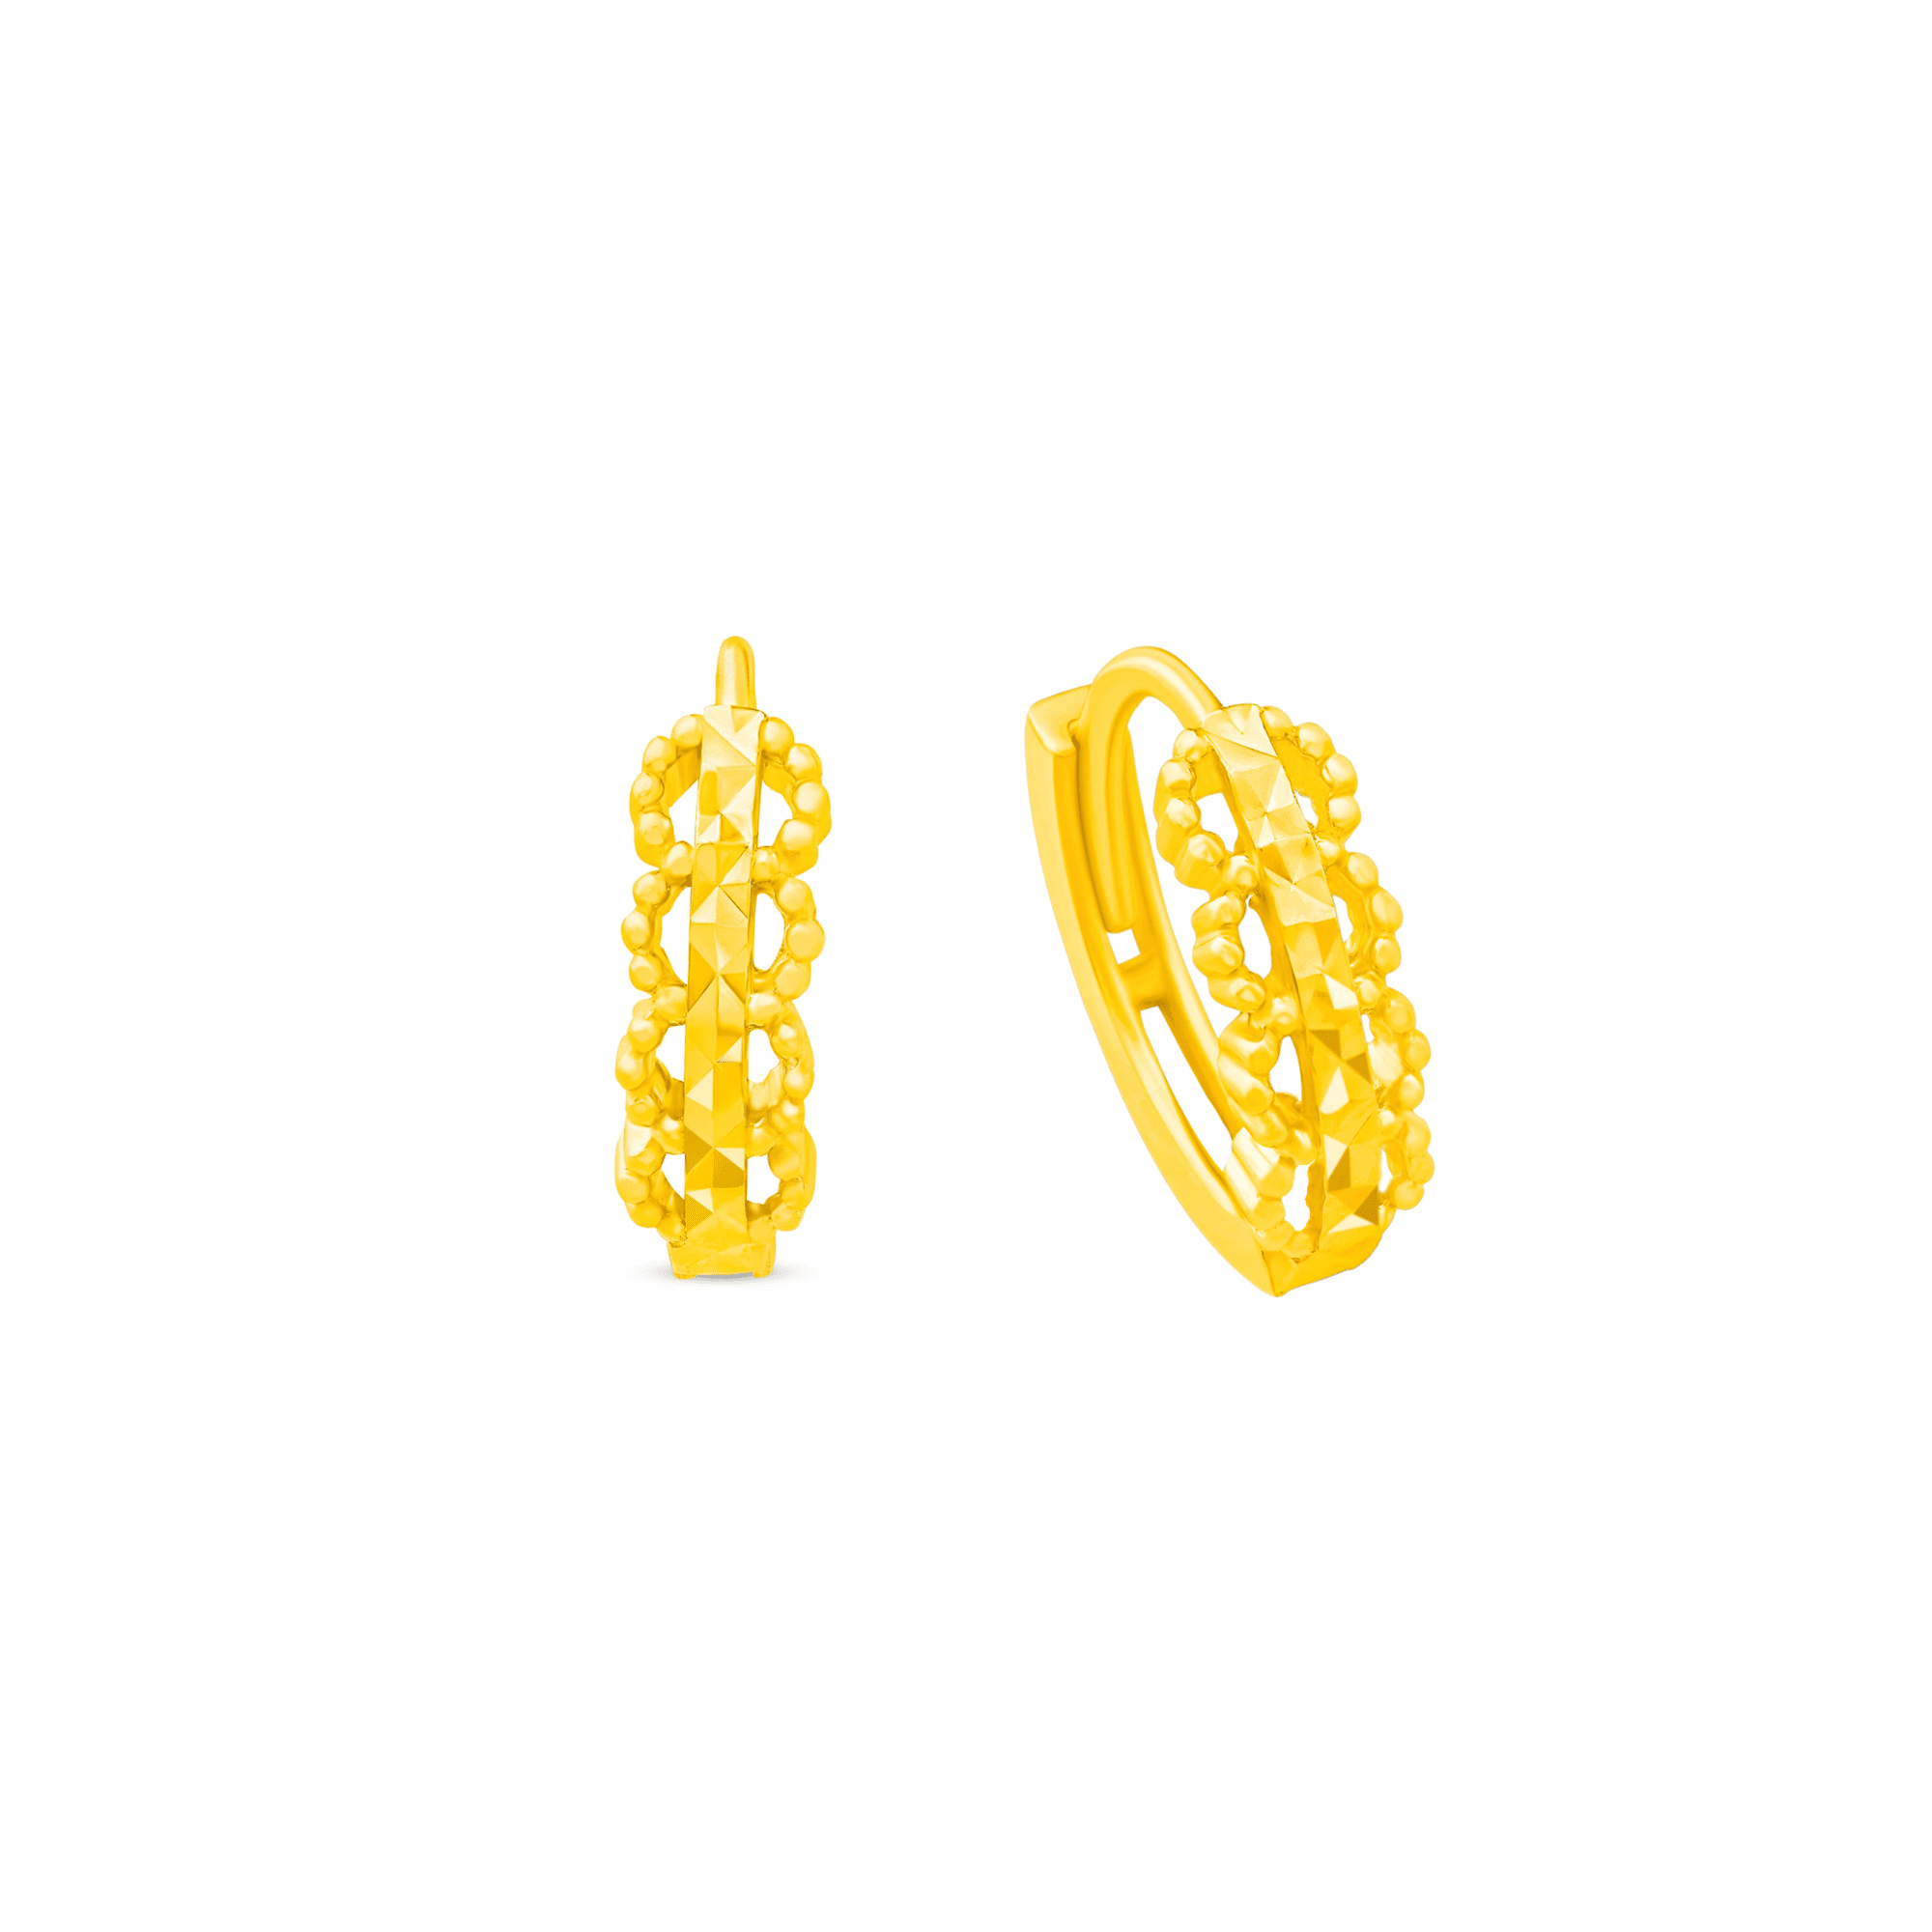 Endless Beads Earrings in 916 Gold